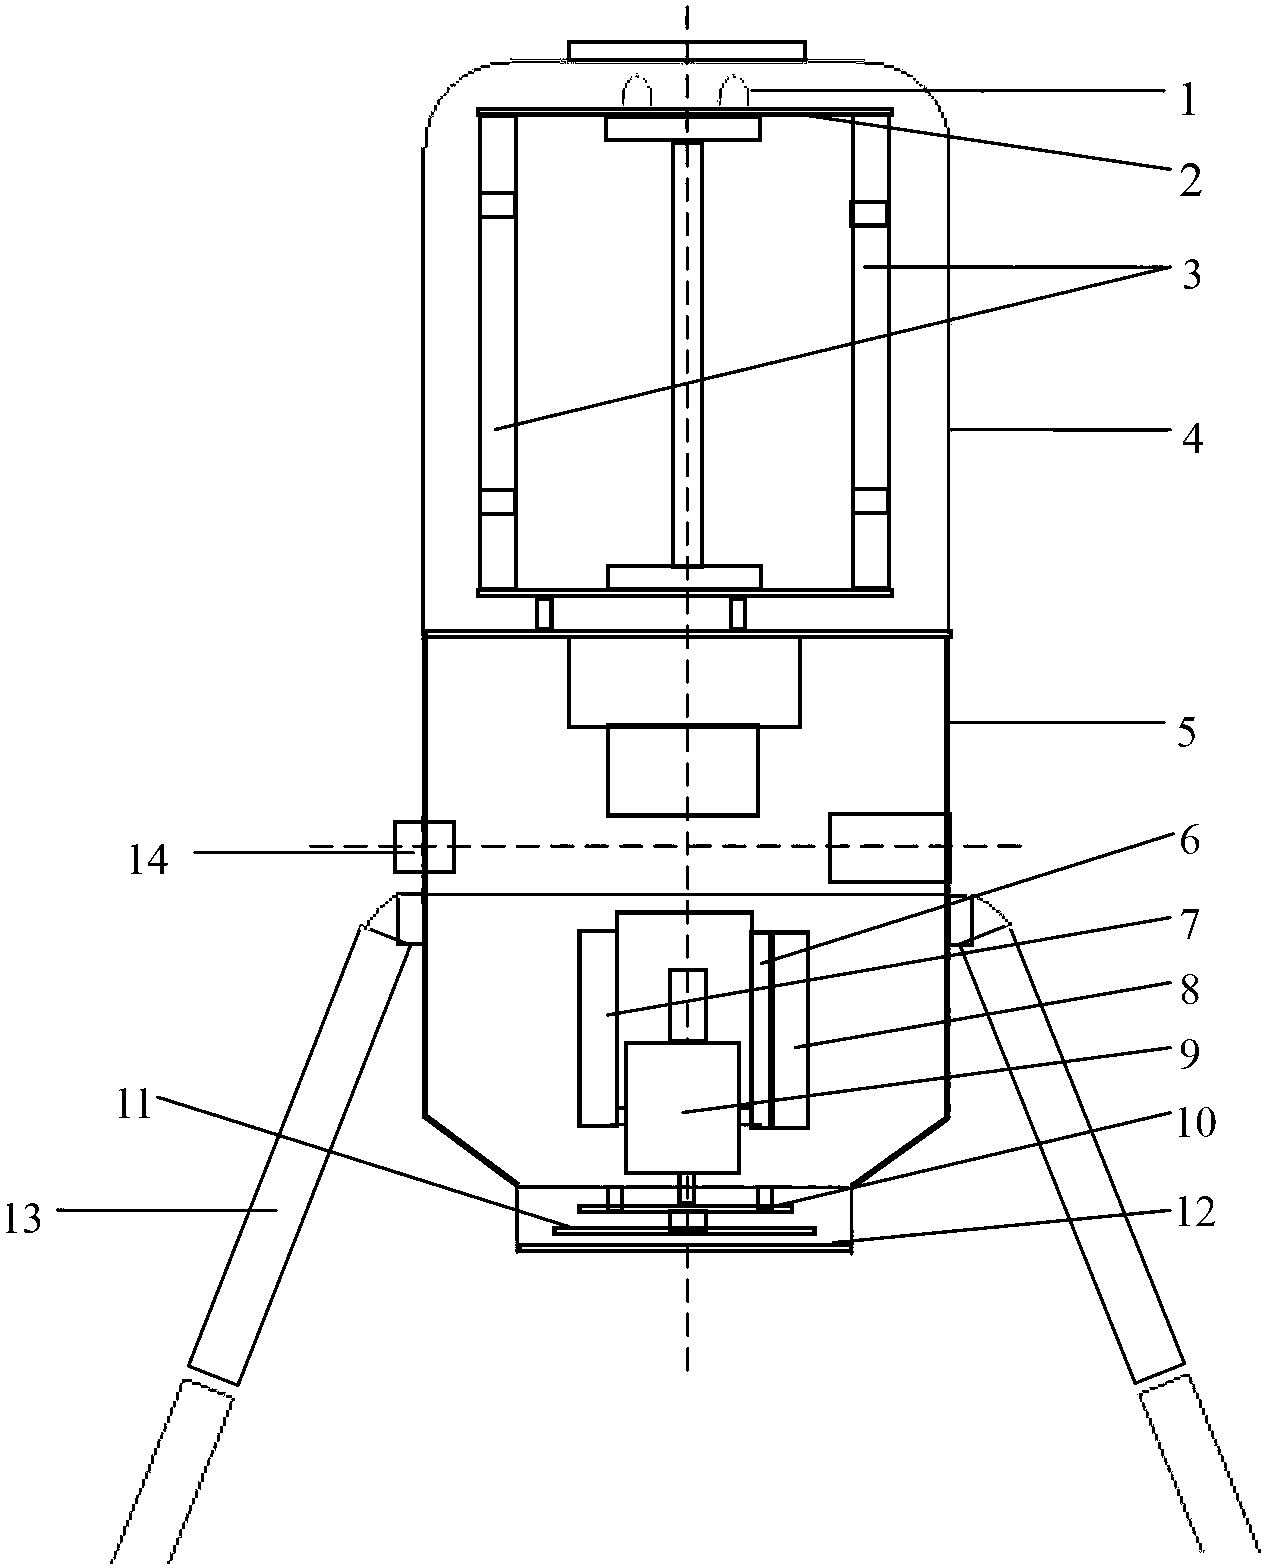 Integrated device for lightning and ground electric field monitoring